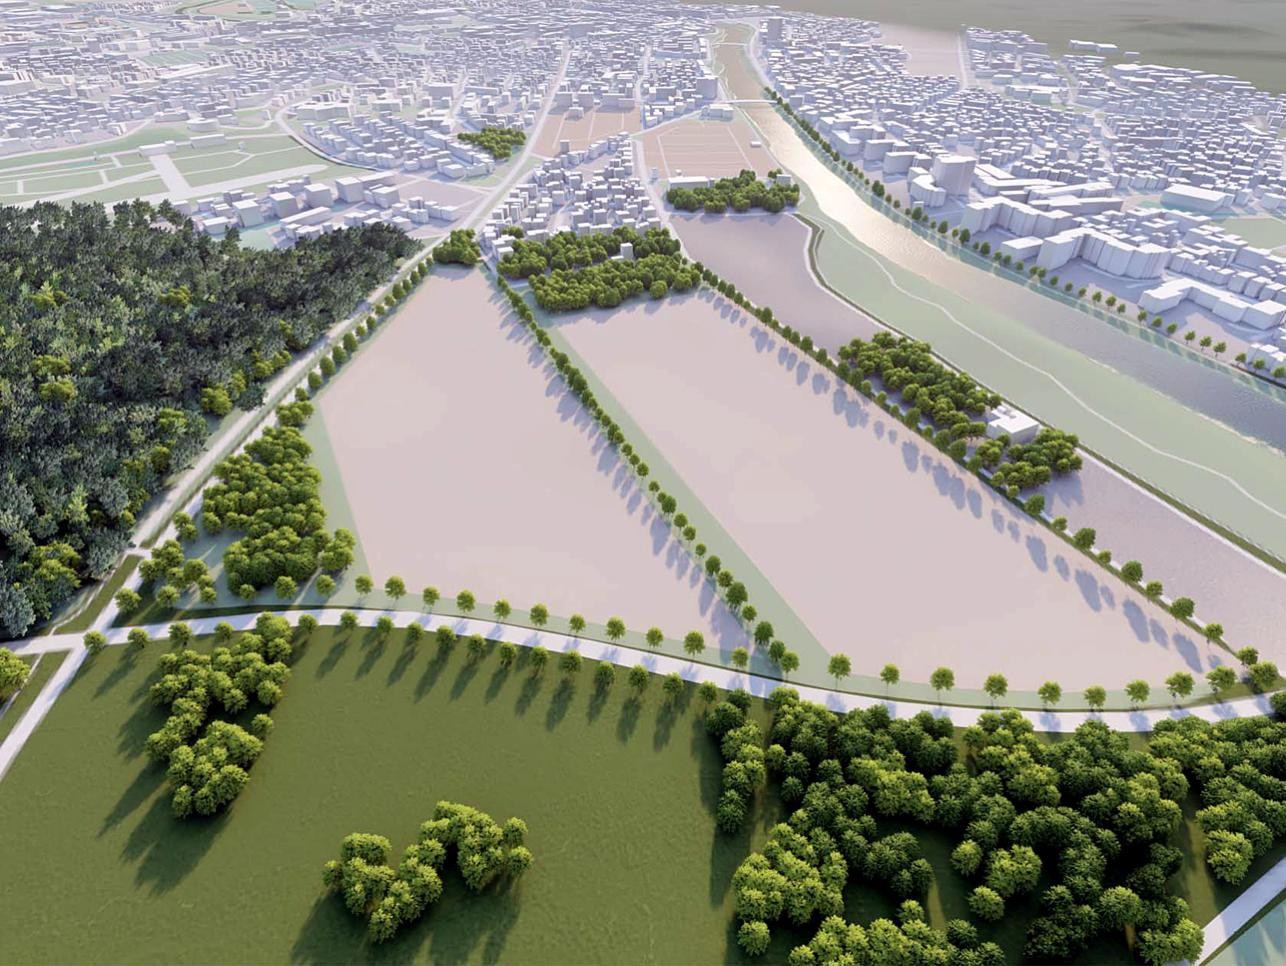 The area at the northern entrance to Rastatt is to be used for high-quality residential development, among other things